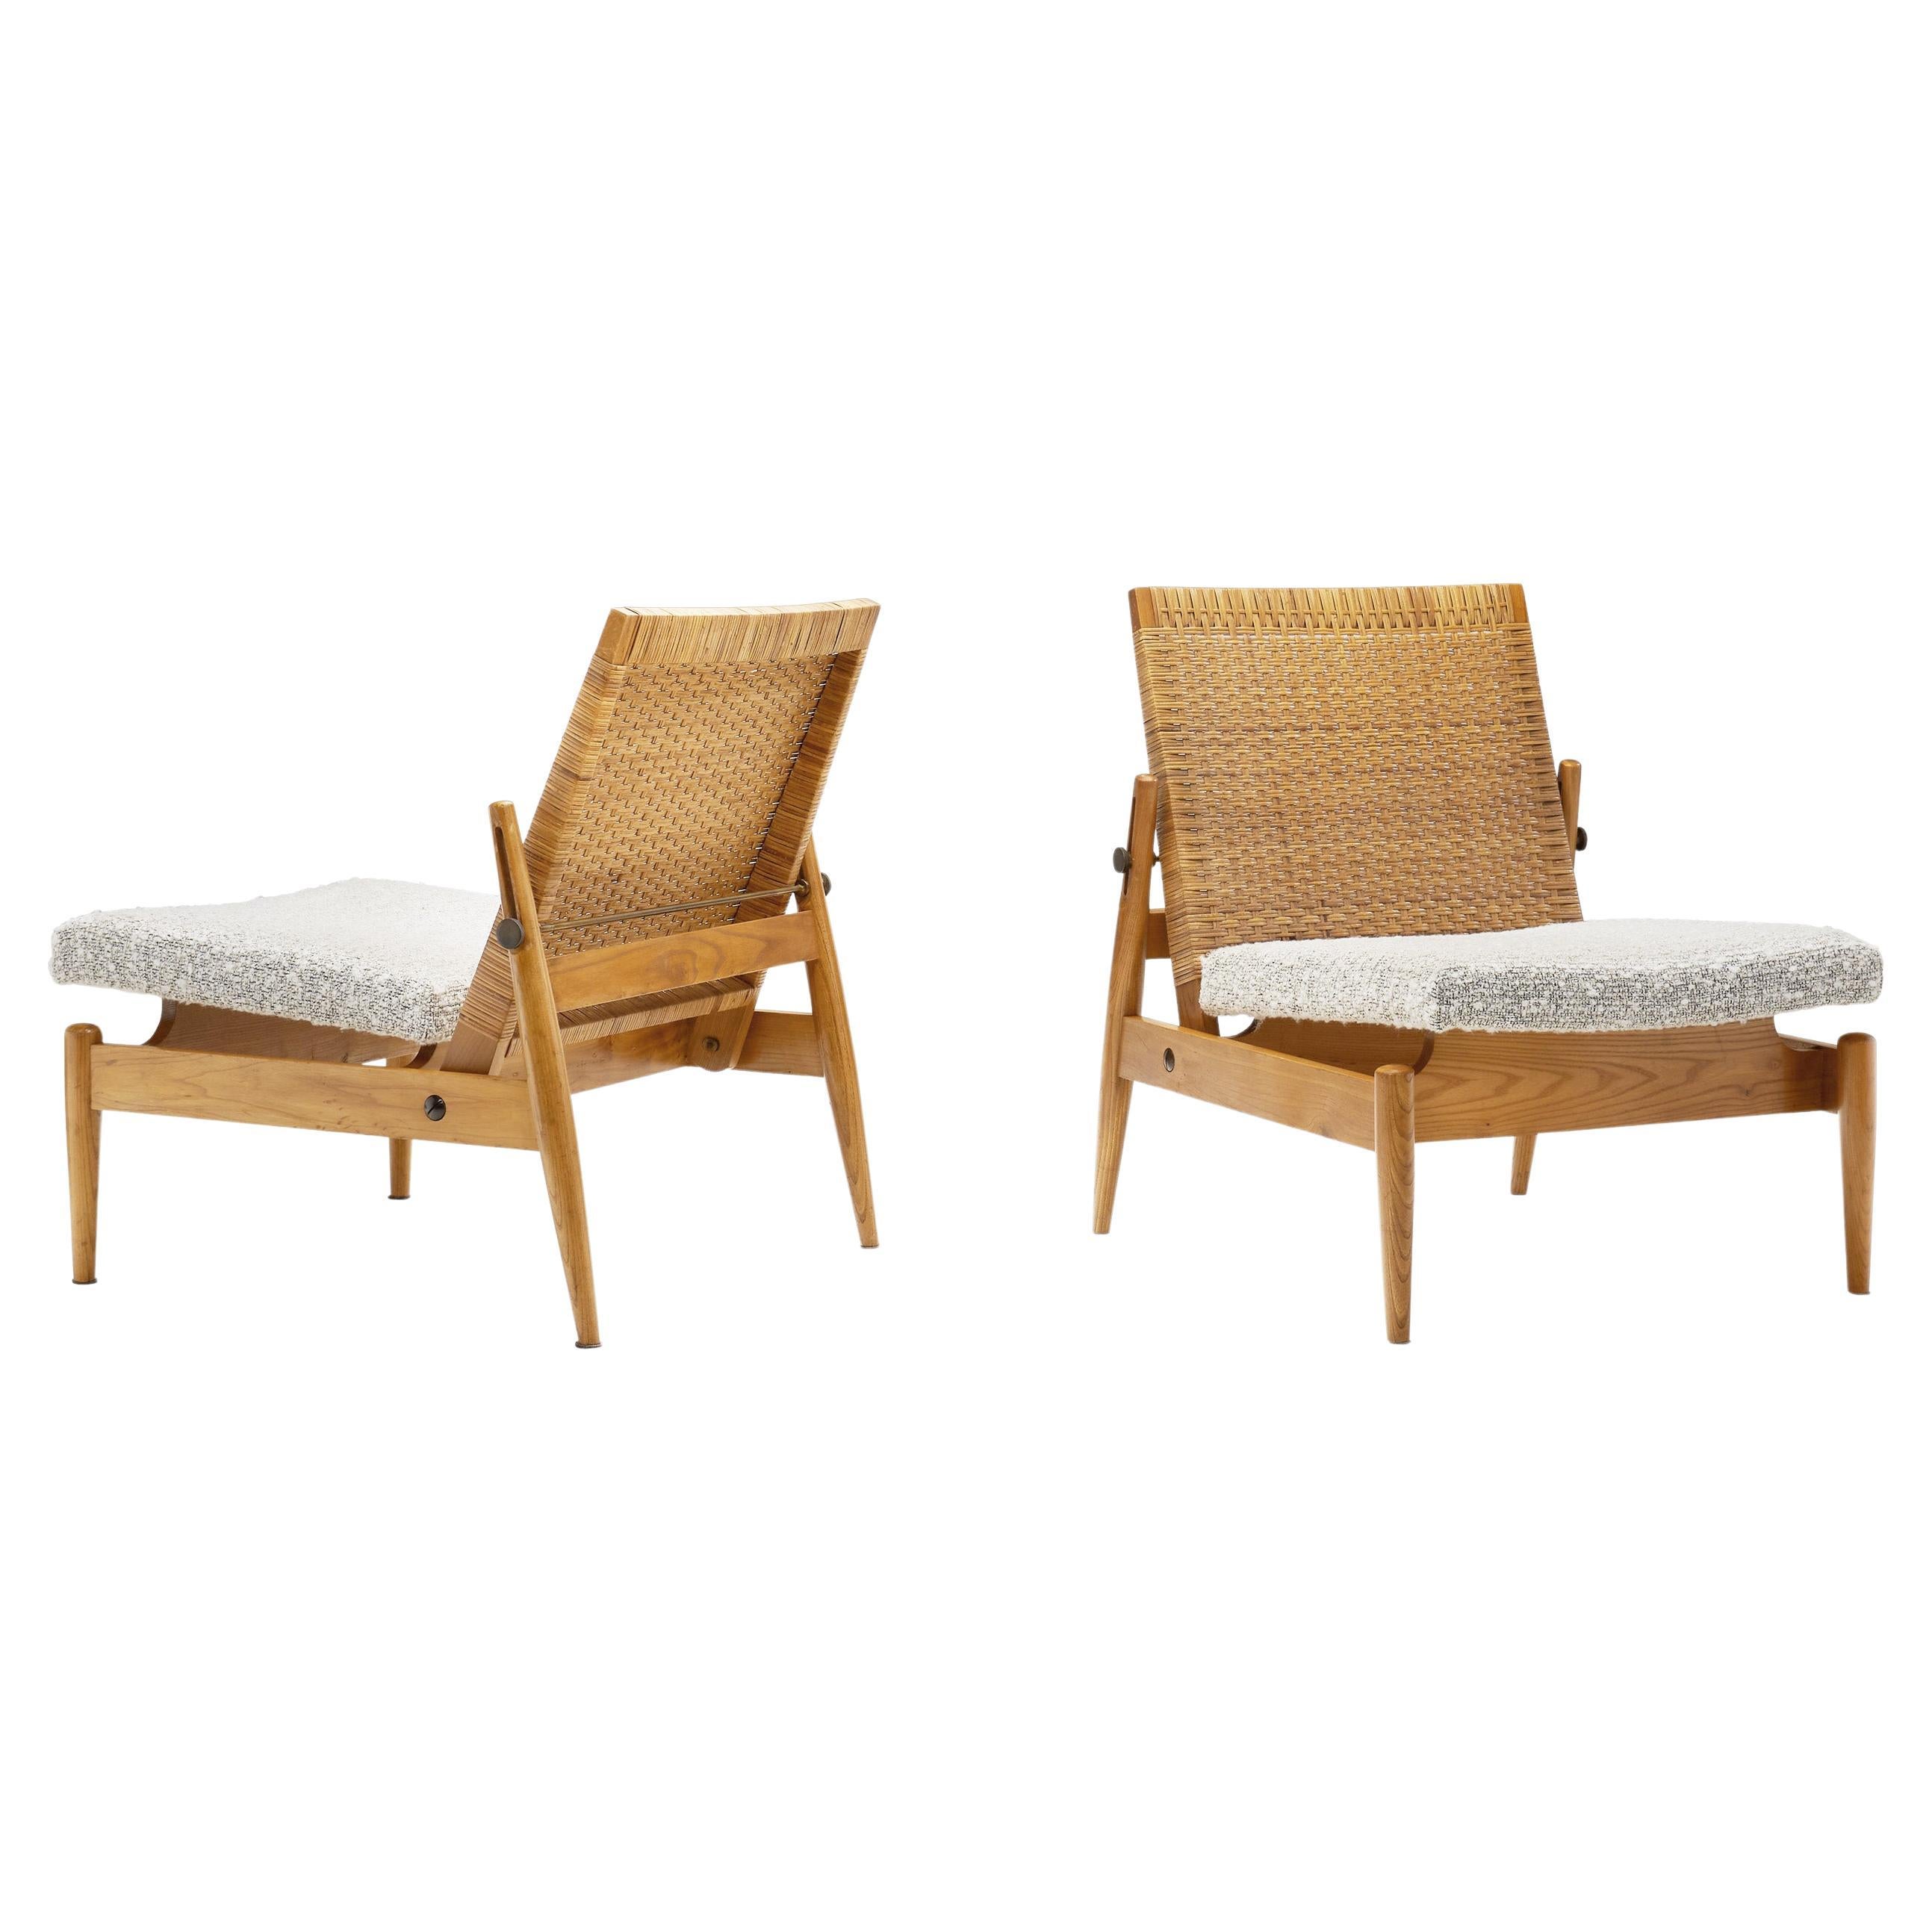 Pair of Upholstered Rattan and Wood Chairs for ULUV, Czechoslovakia ca 1960s